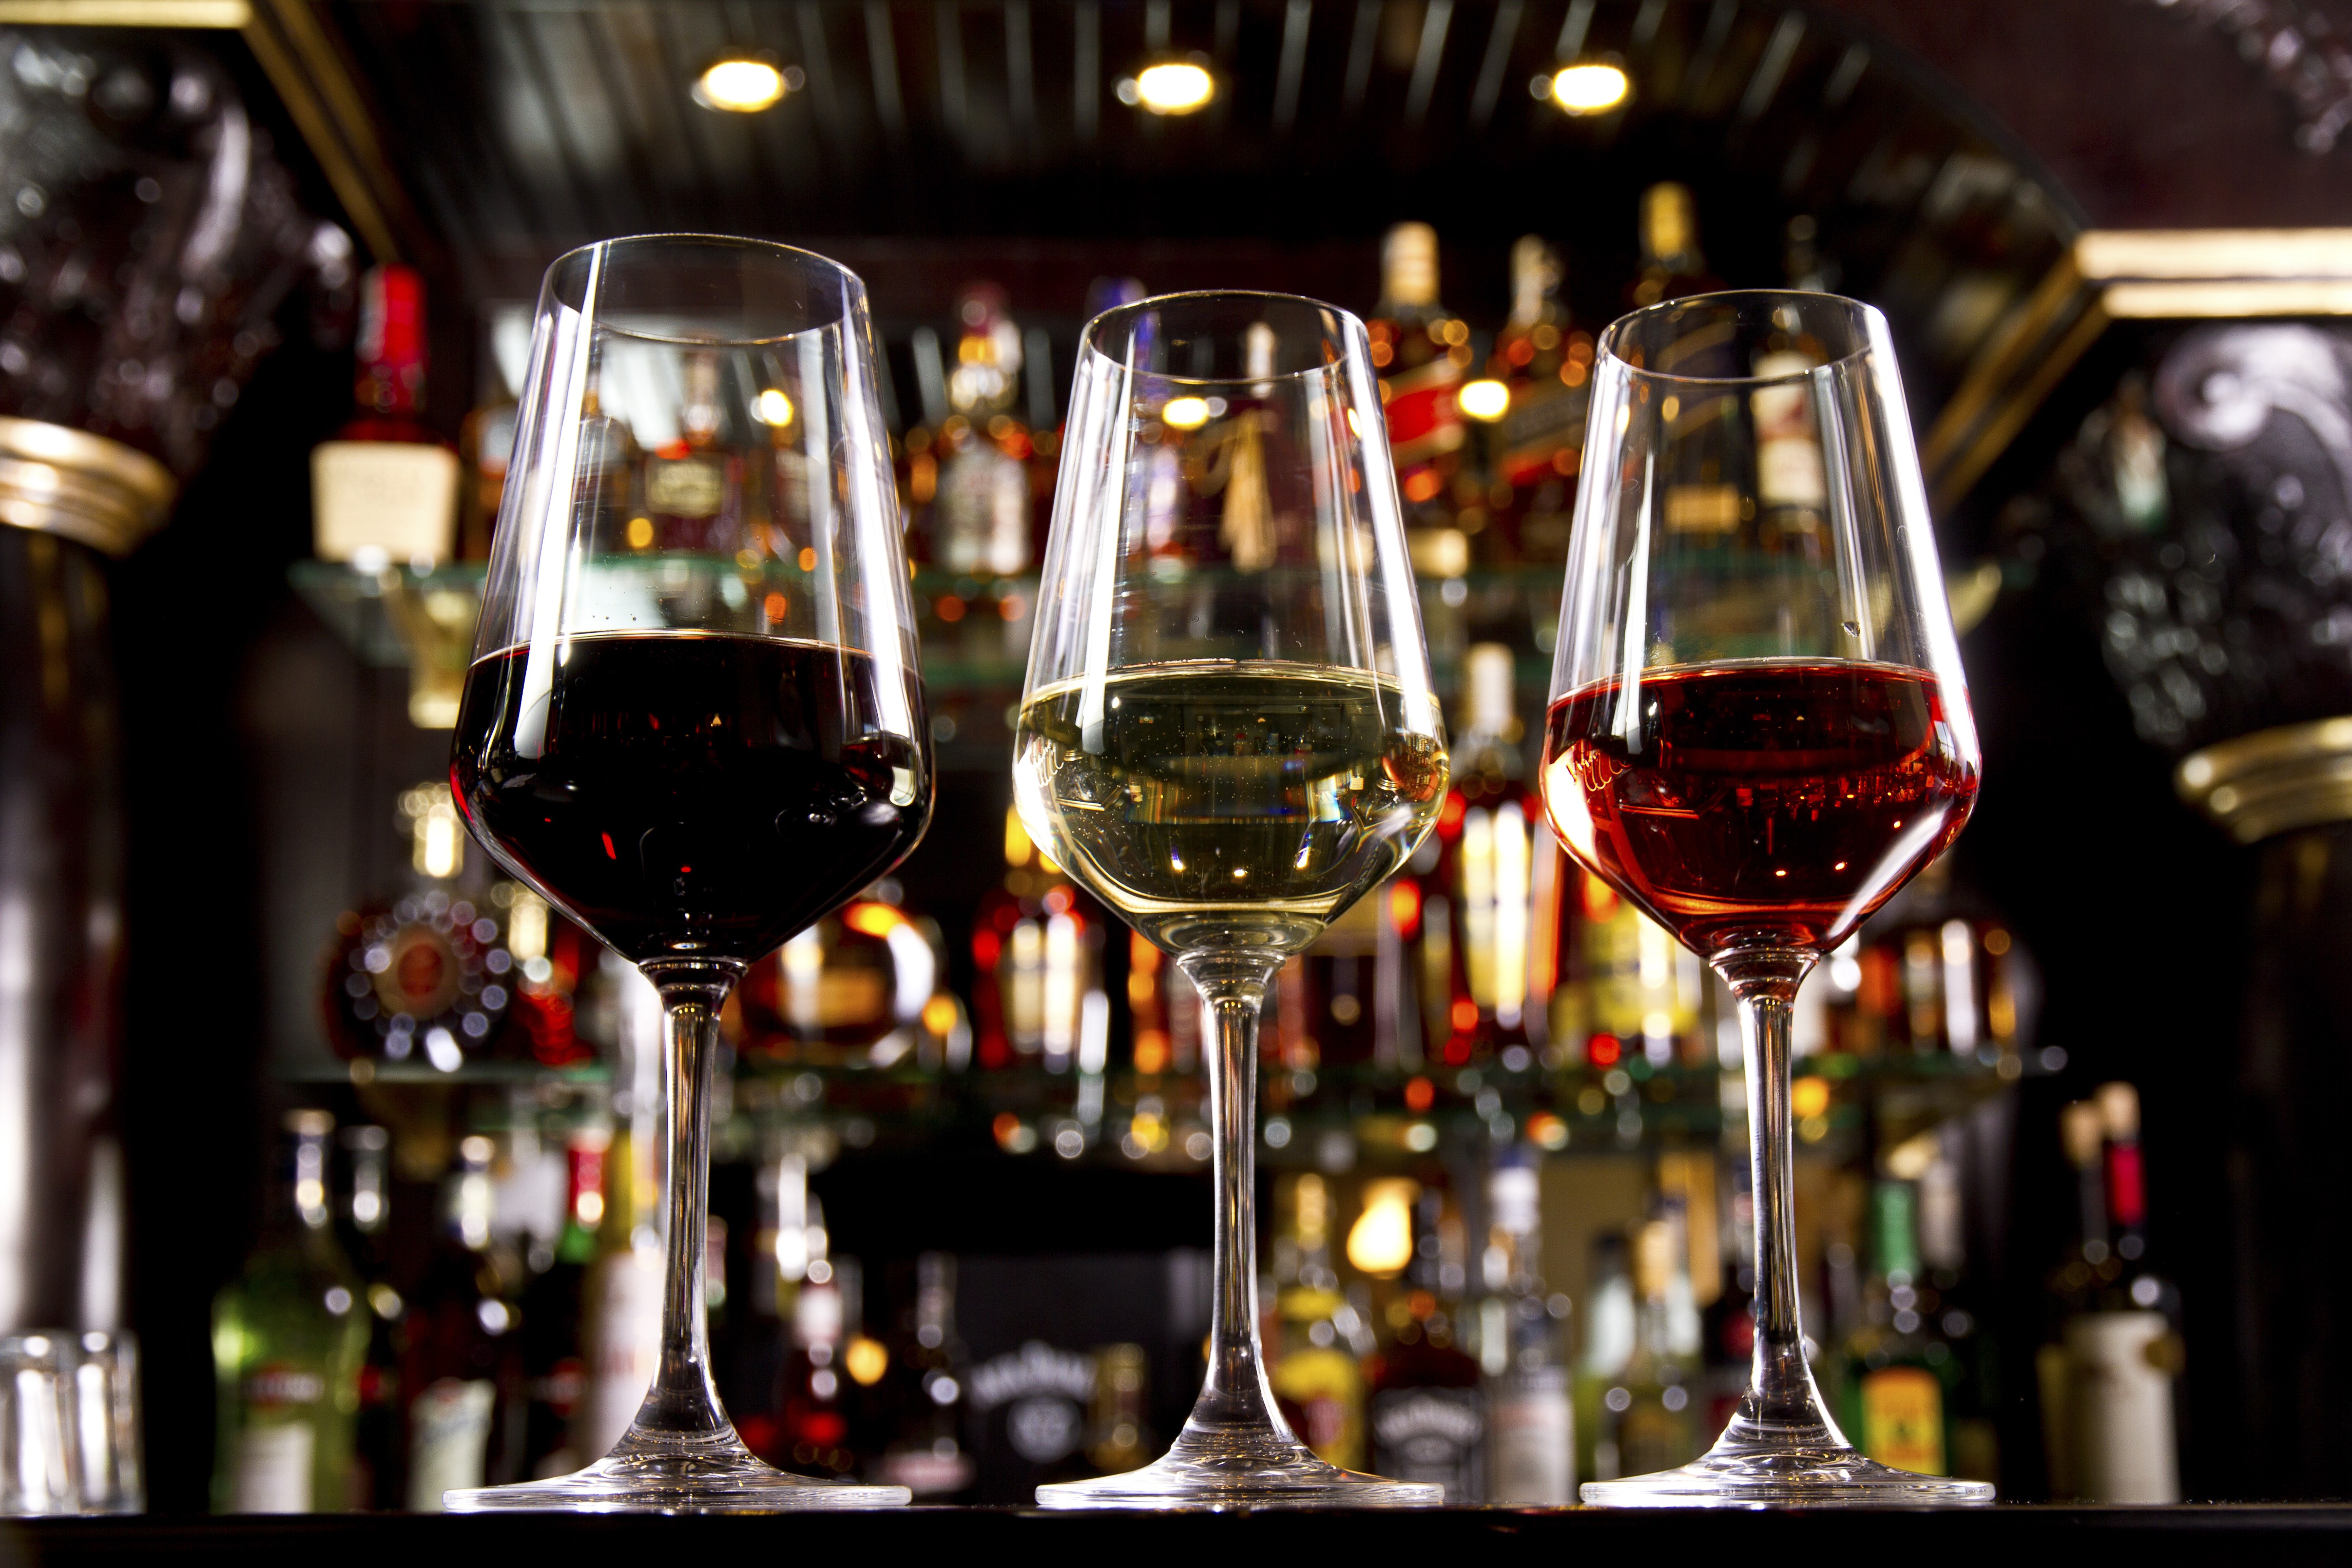 A wide range of wines by the glass is a focus at Red Door at the Vault in Central.